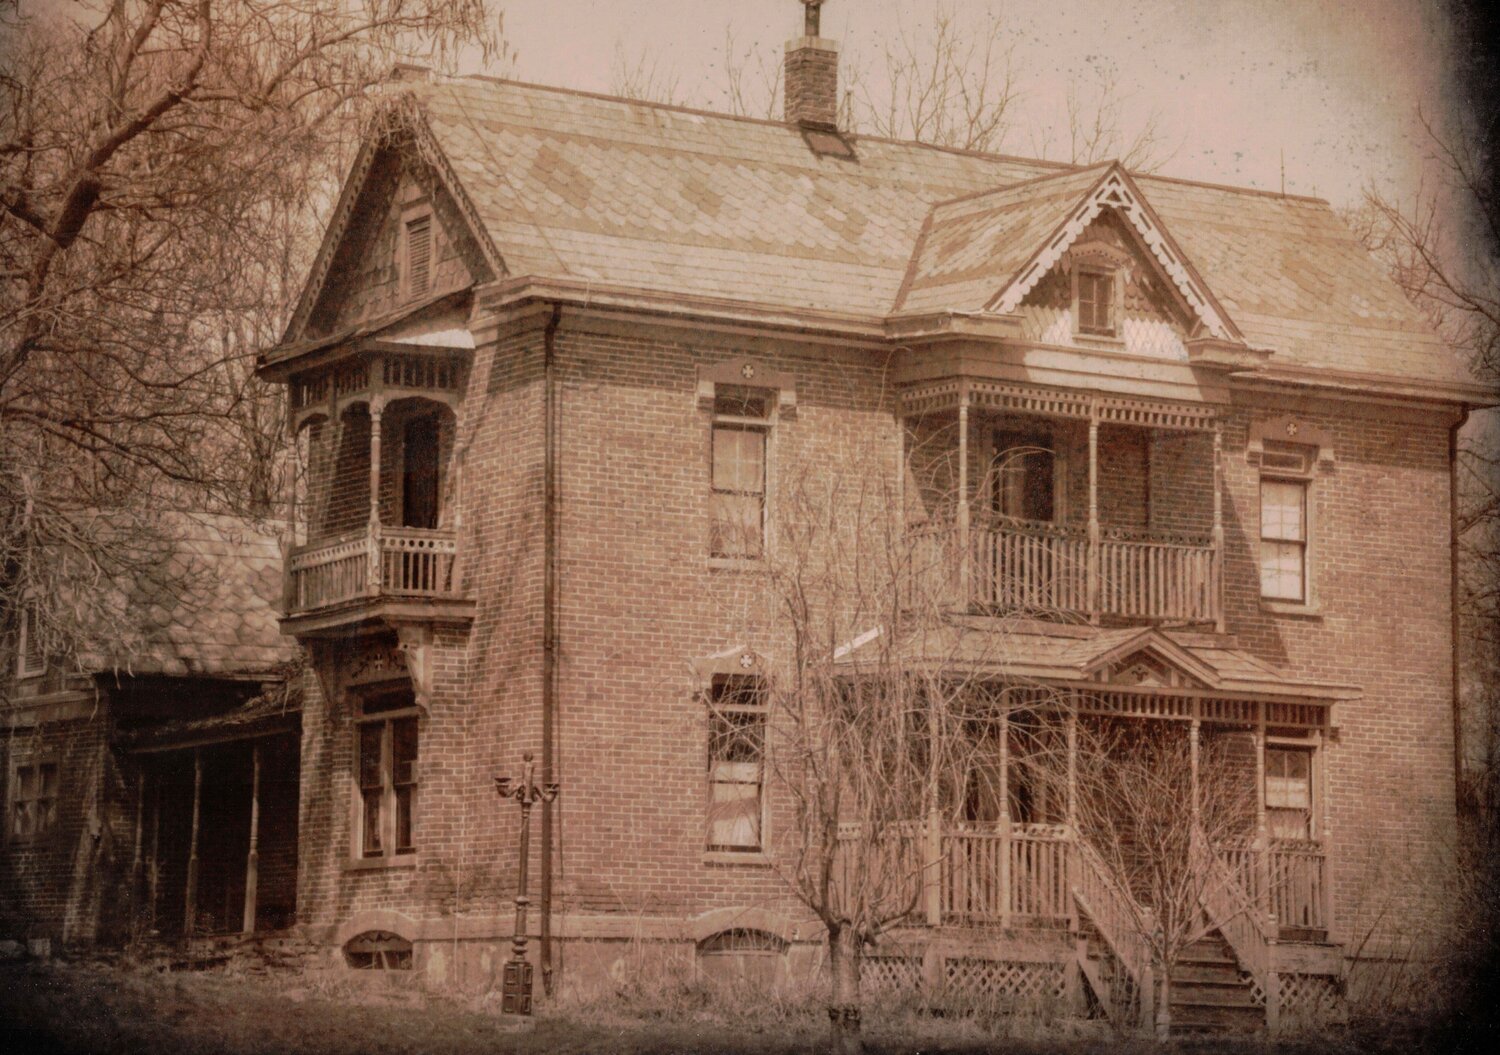 A museum photo of the Swift house circa 1900.